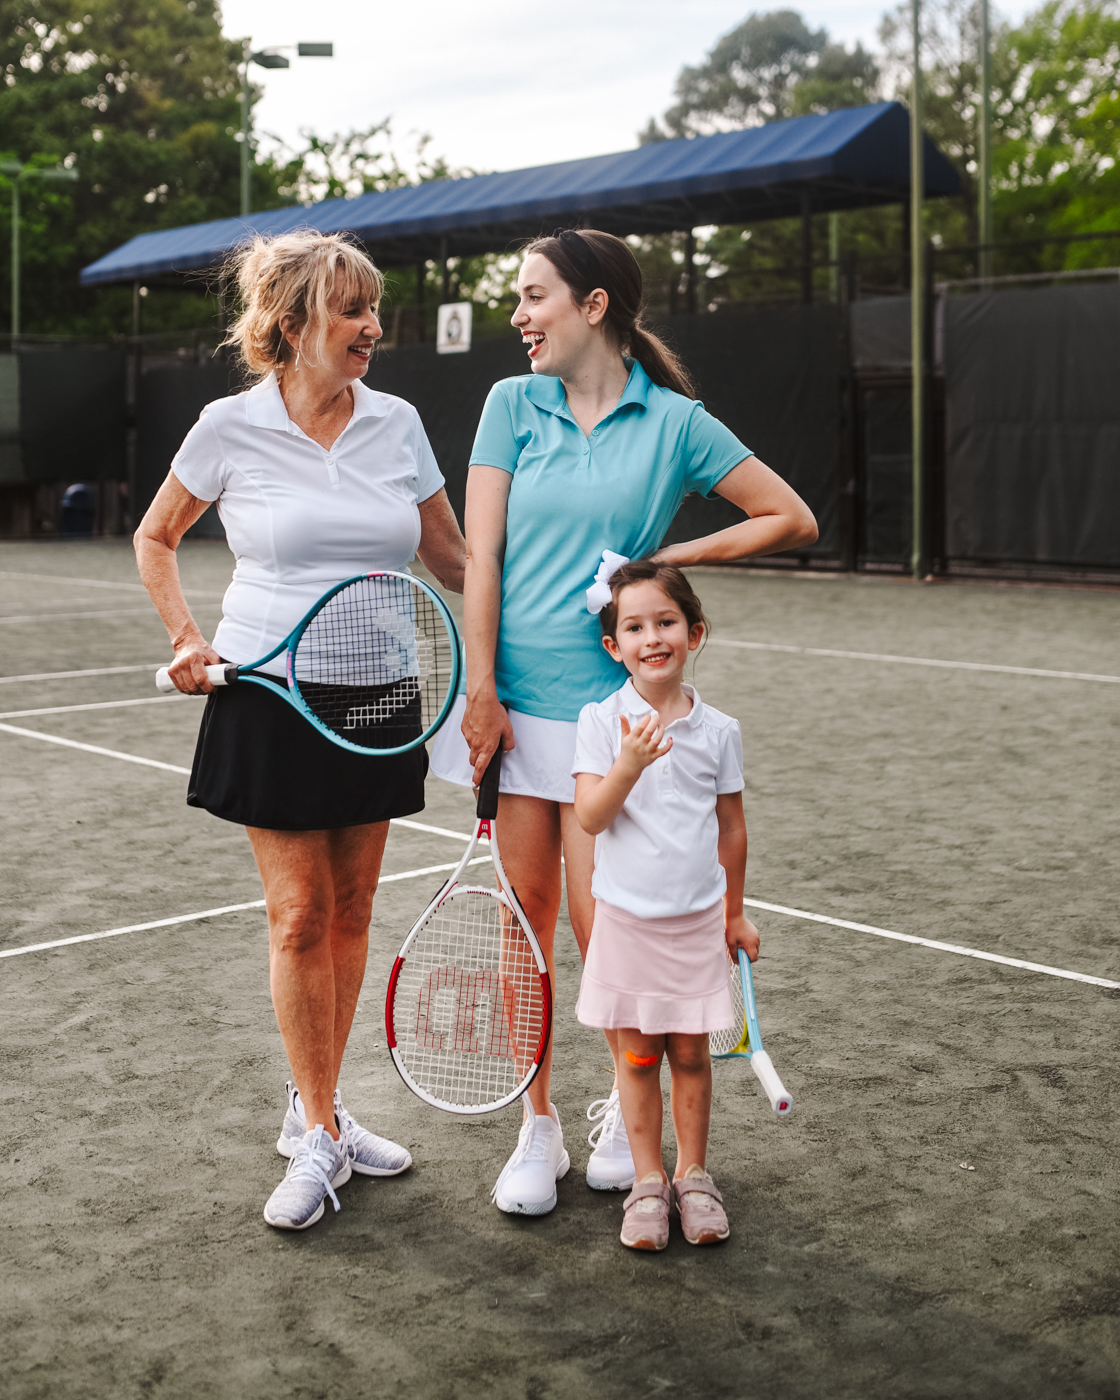 Tennis Outfits by popular Memphis fashion blog, Lone Star Looking Glass: image of three women standing together on a tennis court and holding tennis rackets and wearing tennis outfits. 